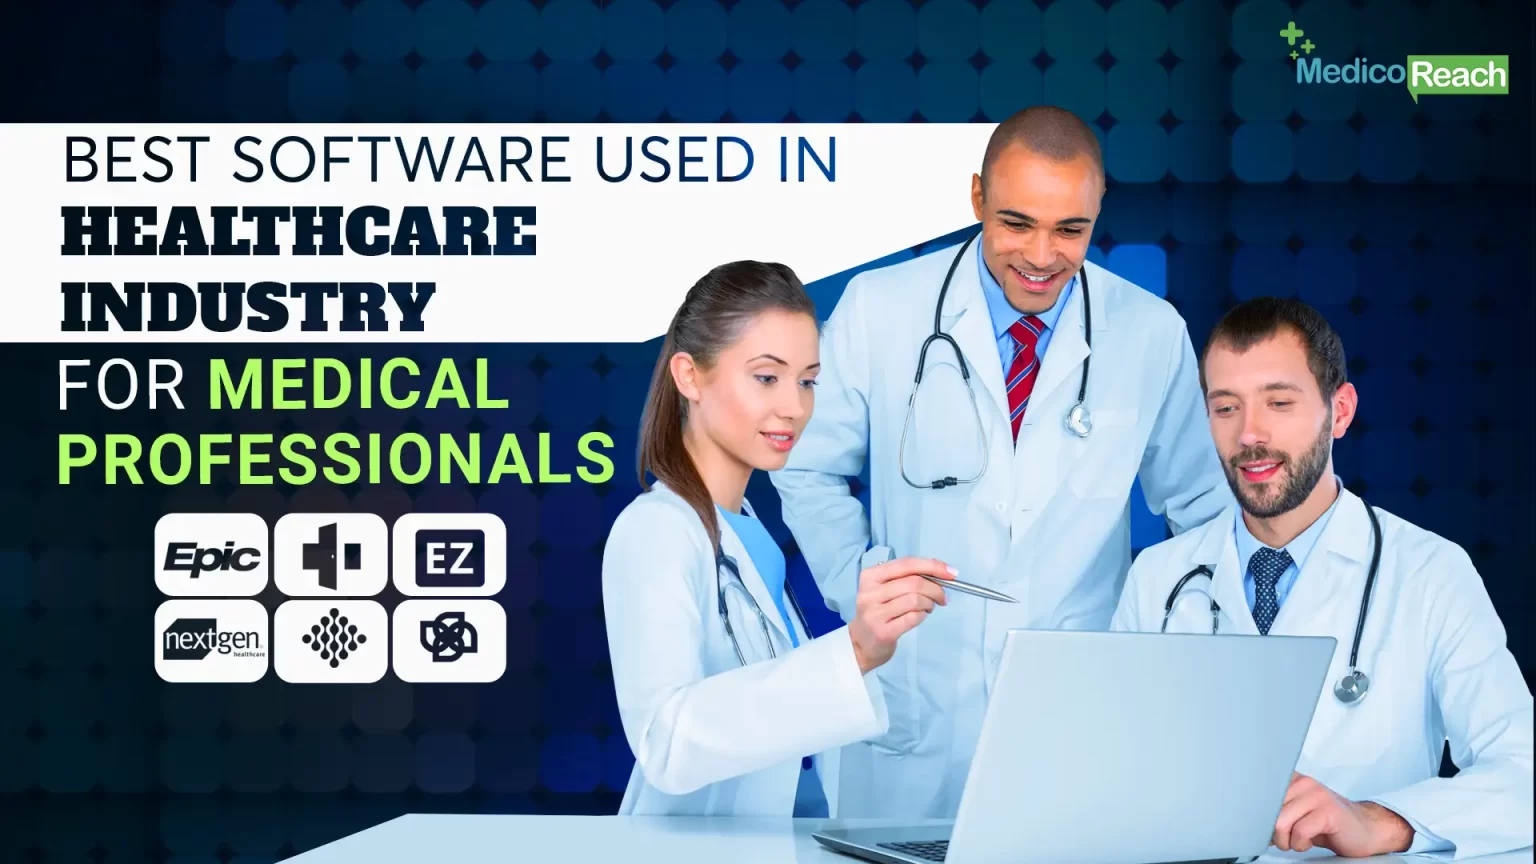 Best Software Used In Healthcare Industry For Medical Professionals